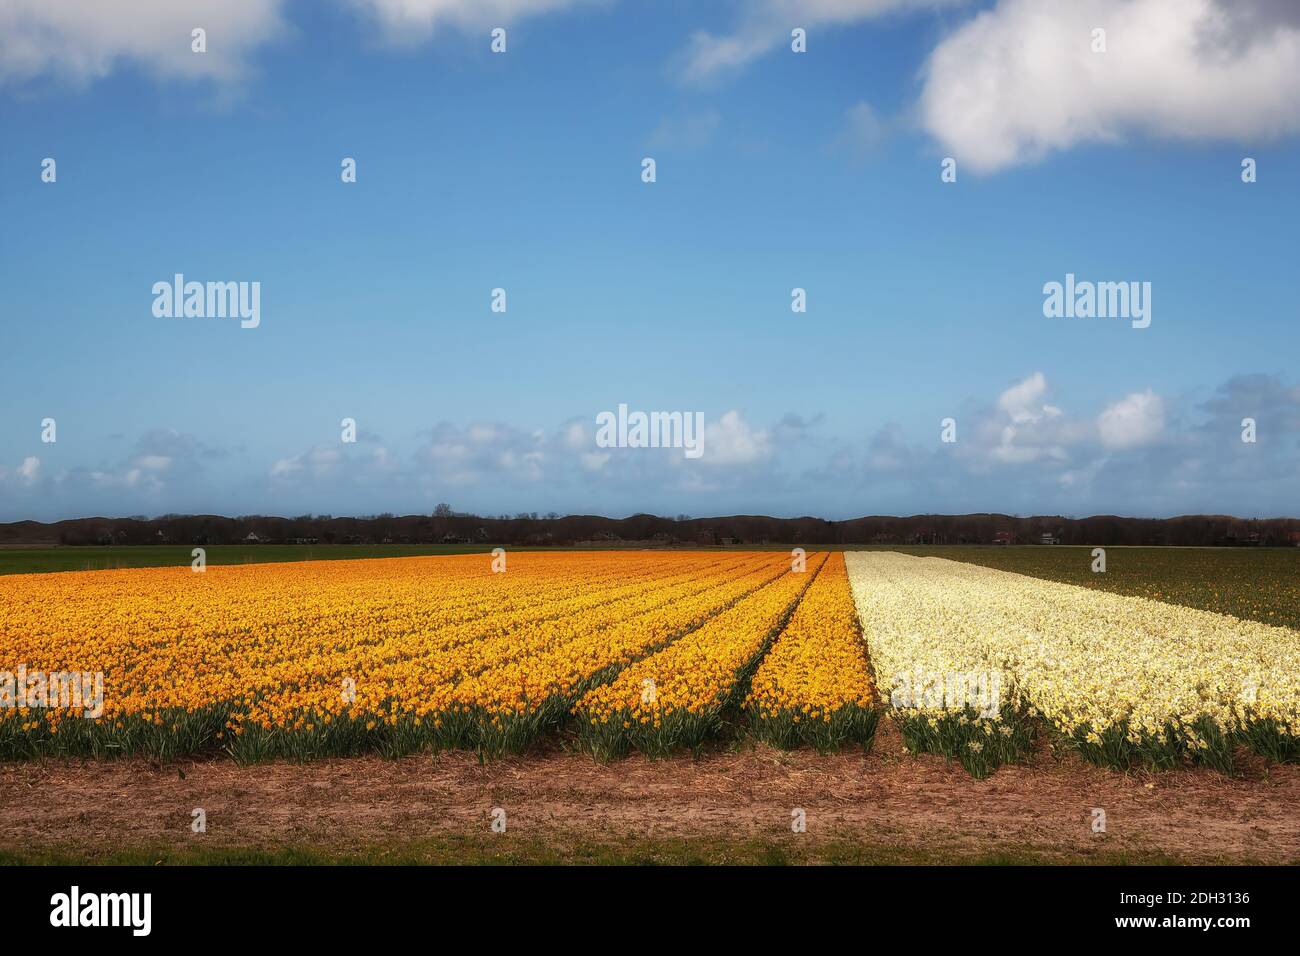 A field of daffodils Stock Photo